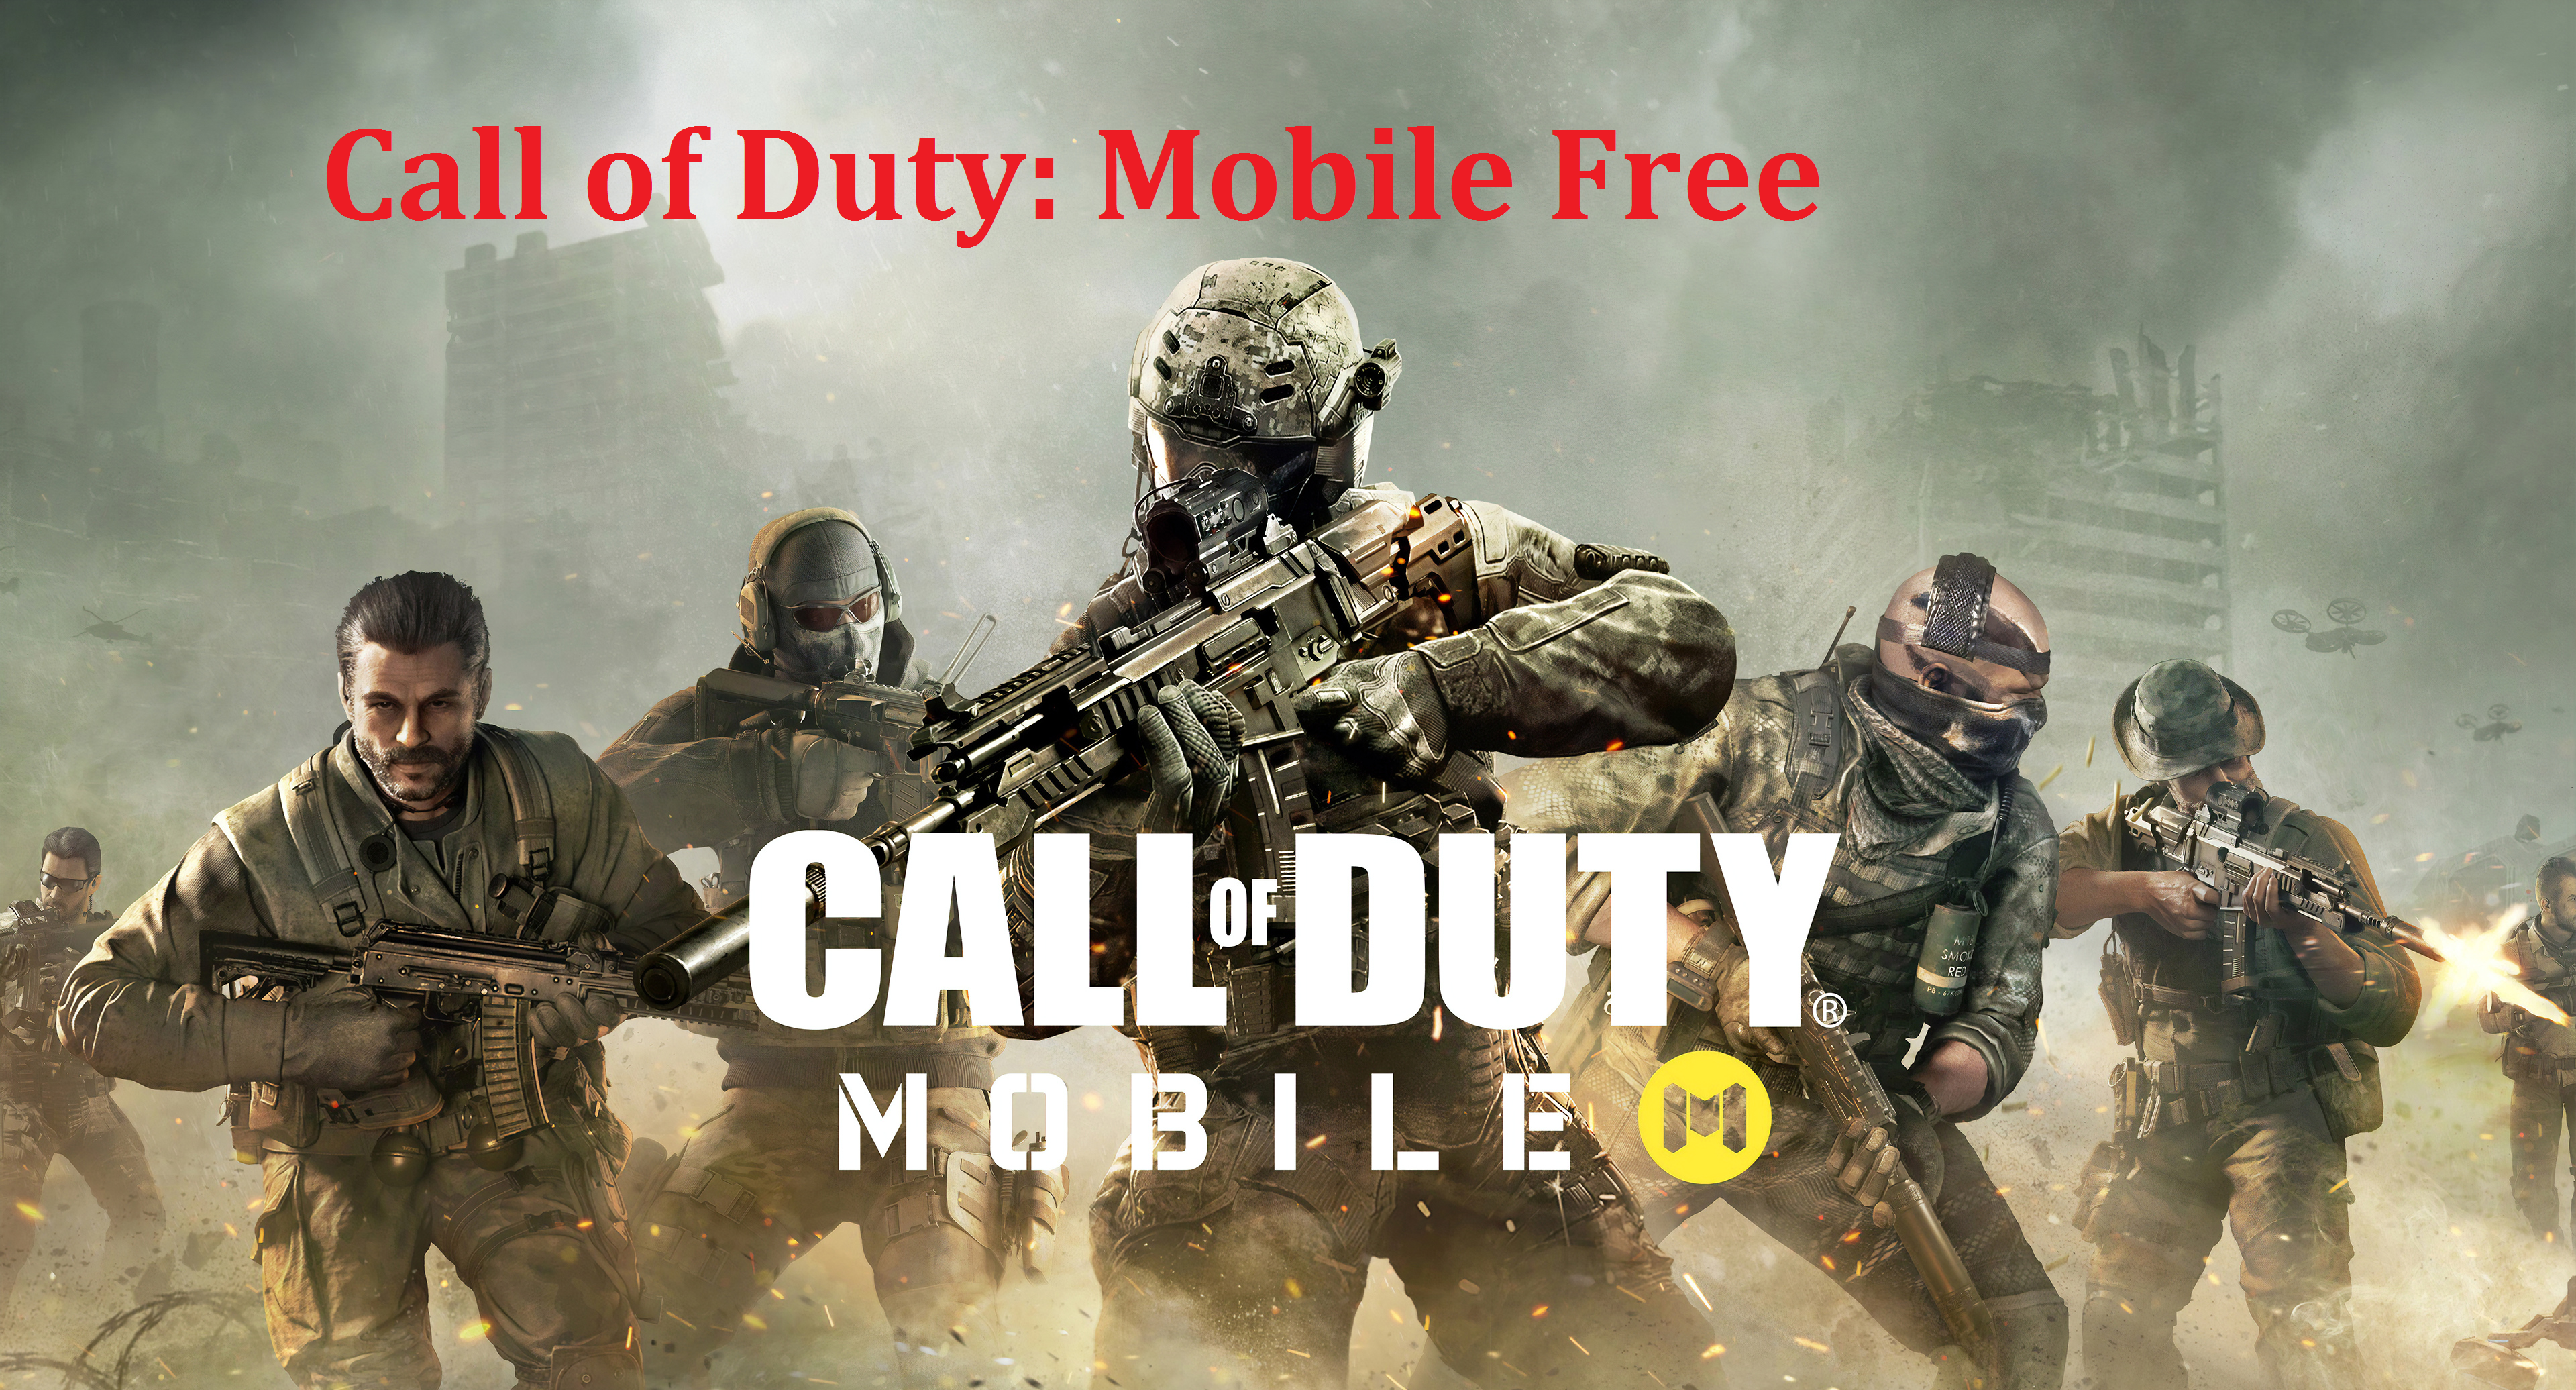 Call of Duty: Mobile Free